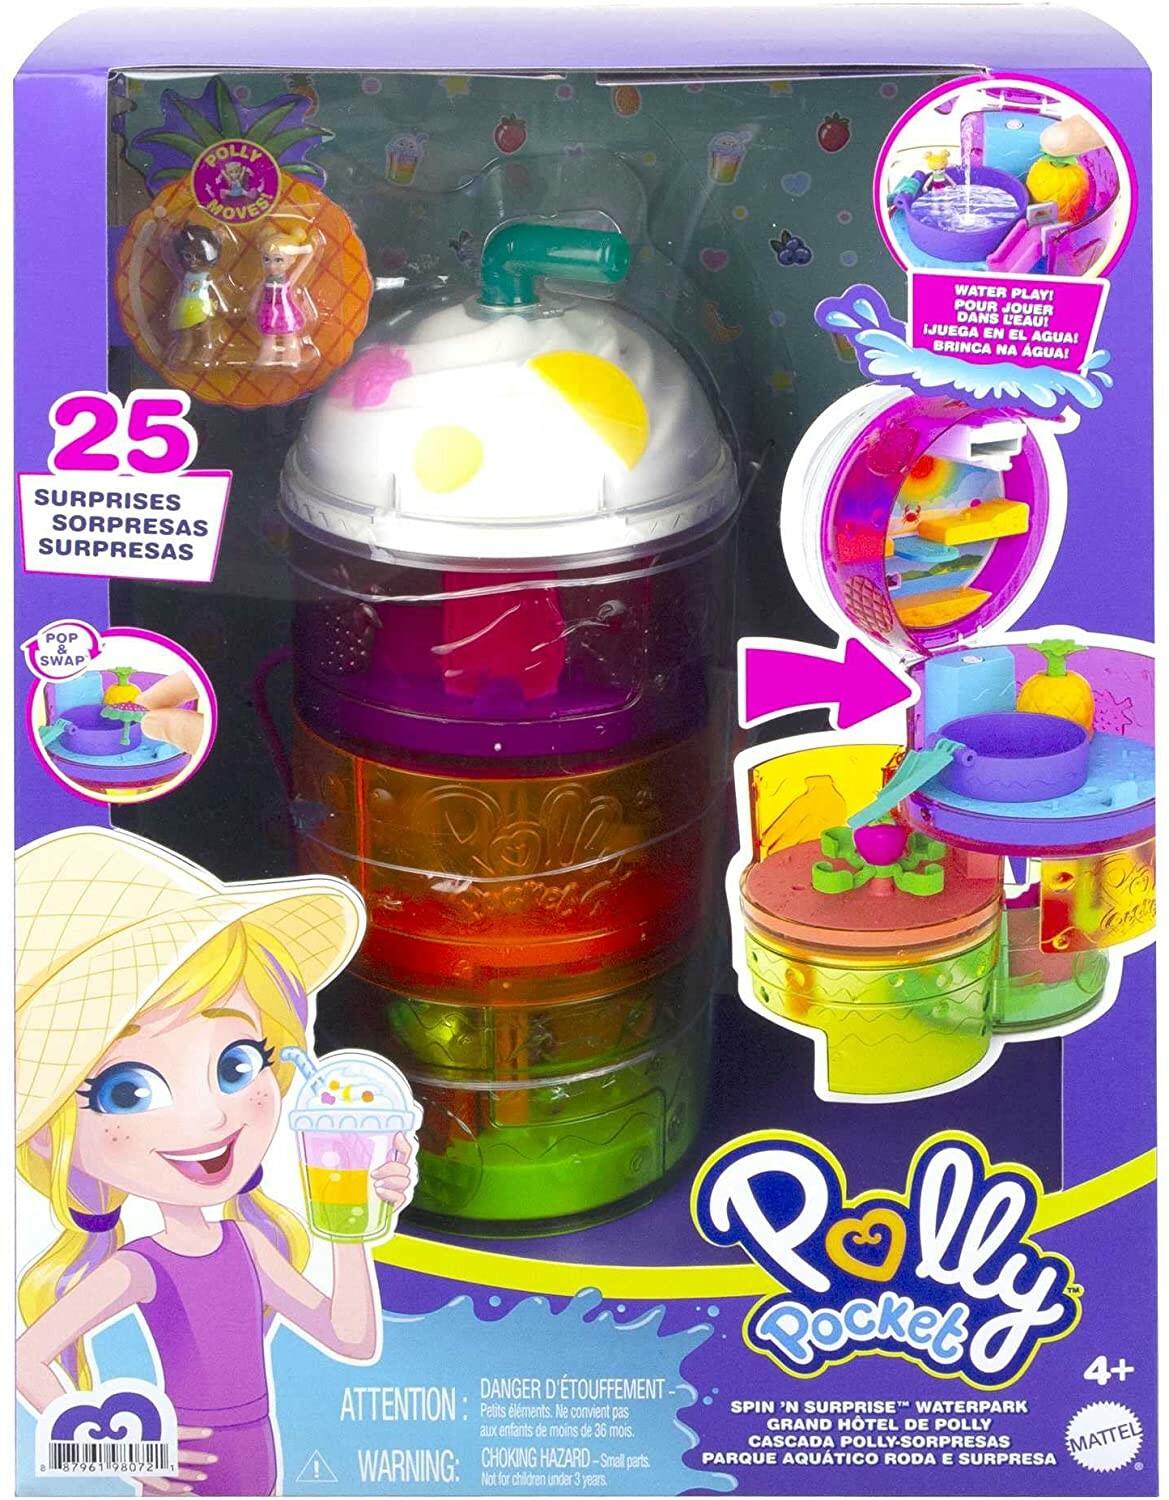 https://content.pearl.fr/media/cache/default/article_ultralarge_high_nocrop/shared/images/articles/T/TG2/polly-pocket-coffret-multifacettes-smoothie-ref_TG2274_3.jpg